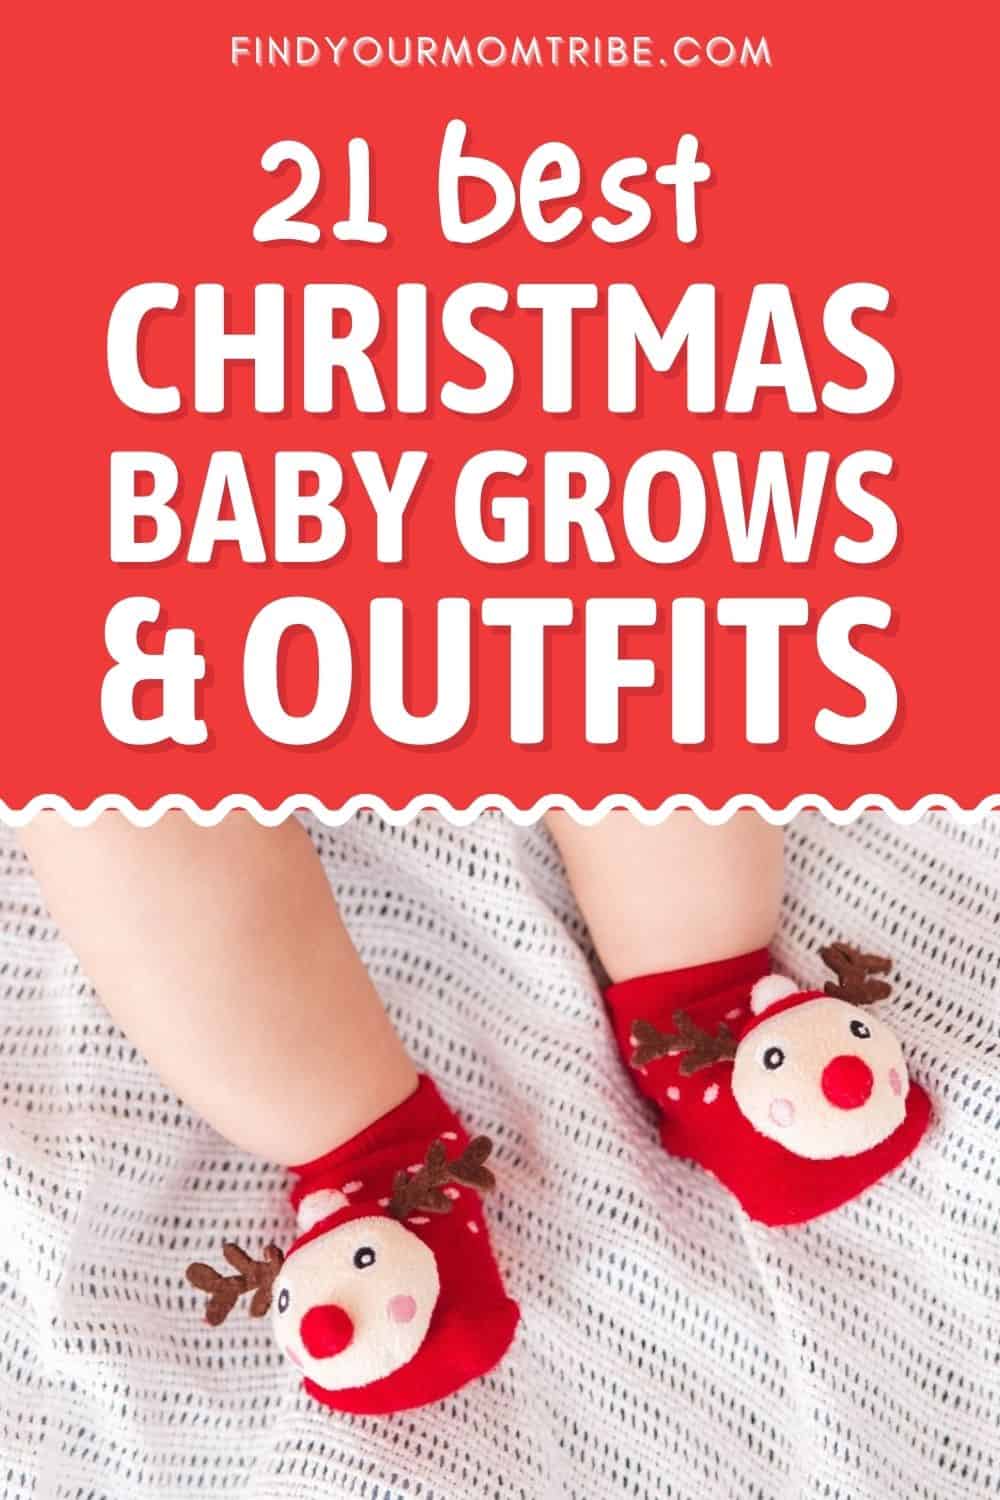 21 Best Christmas Baby Grows and Outfits Pinterest